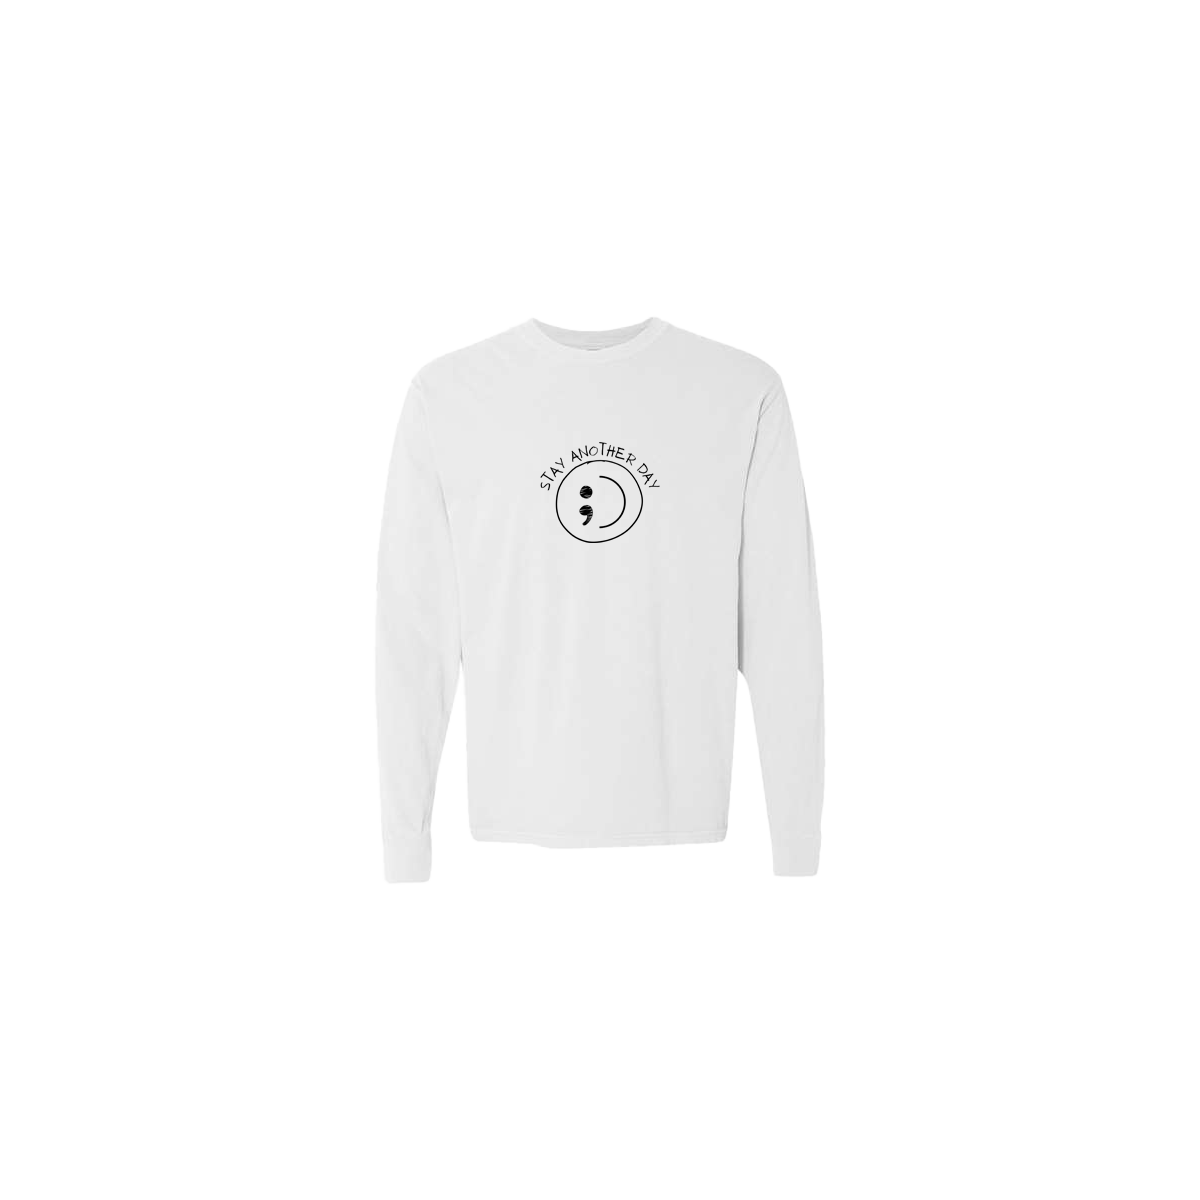 Stay Another Day Smiley Face Embroidered White Long Sleeve Tshirt - Mental Health Awareness Clothing